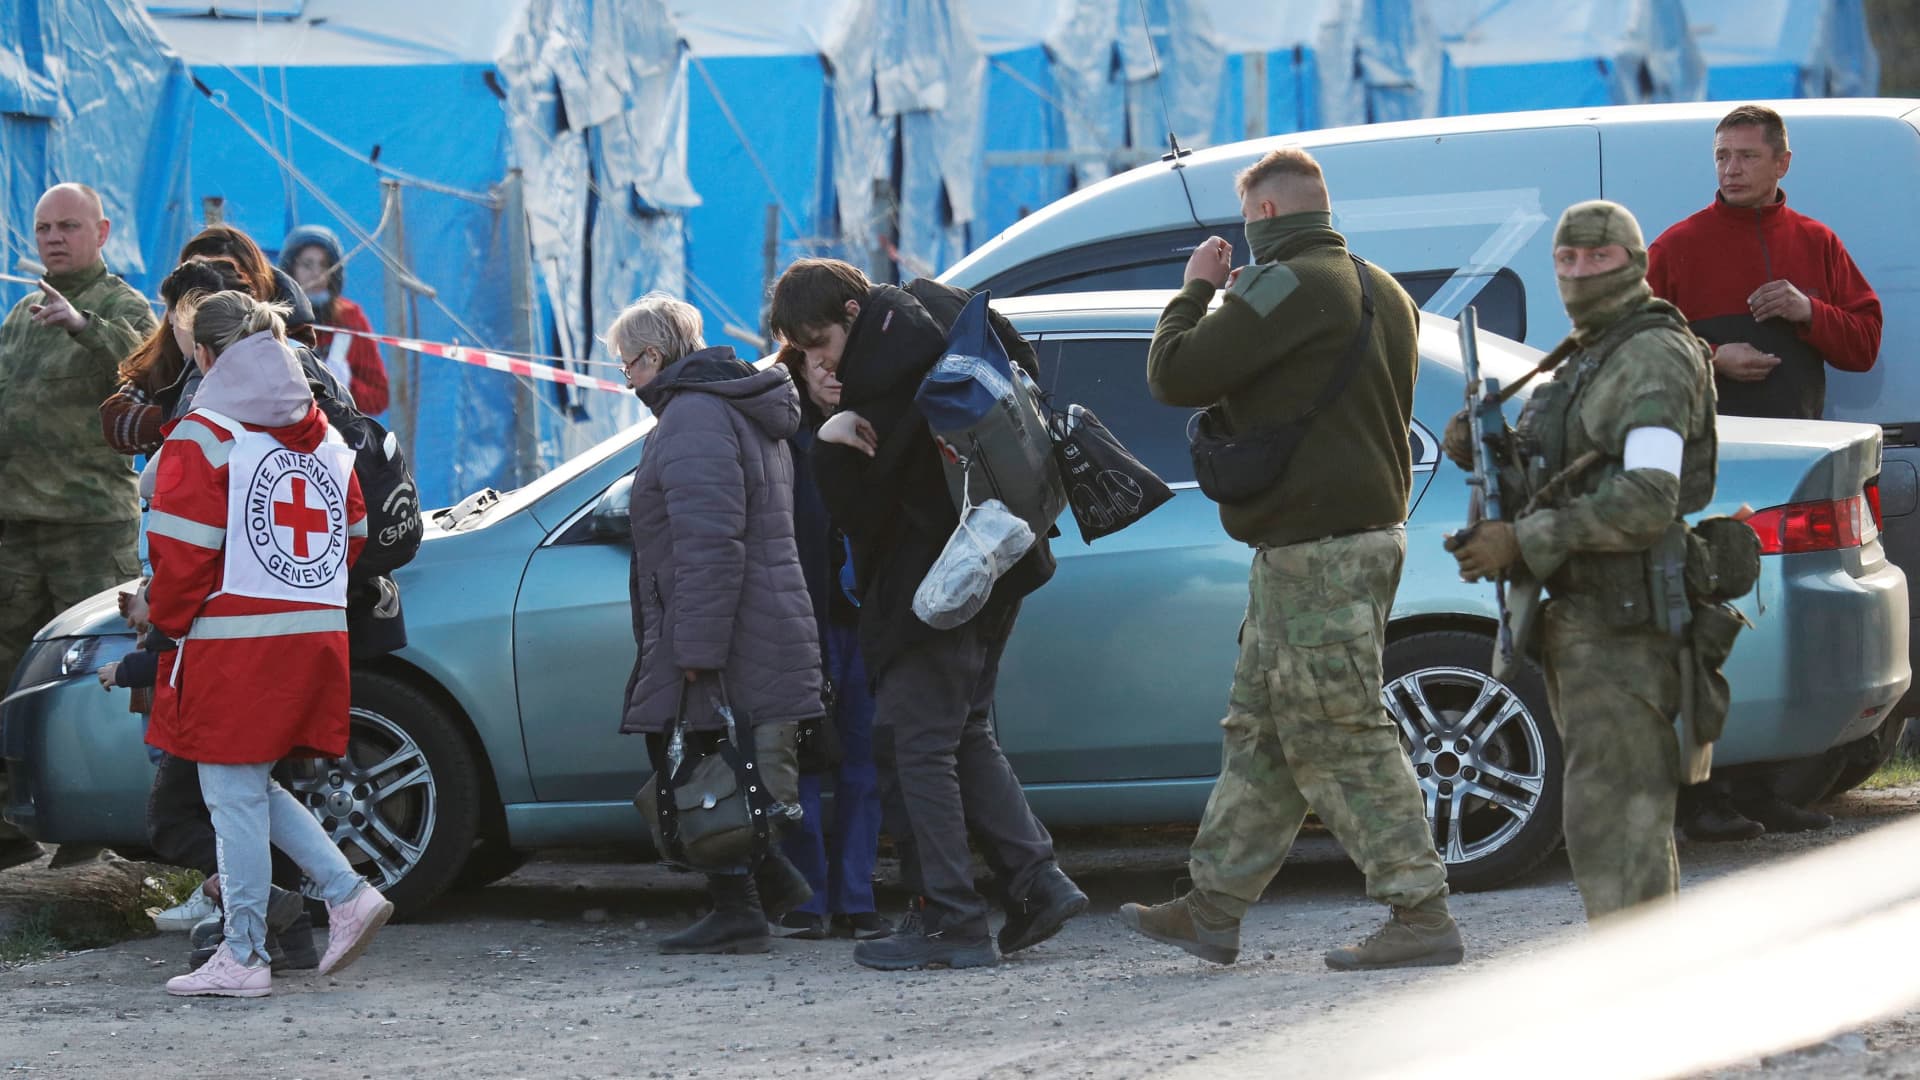 Civilians evacuated from the Azovstal steel plant in Mariupol walk accompanied by a member of the International Committee of the Red Cross (ICRC) and pro-Russian troops, as they arrive at a temporary accommodation center in the village of Bezimenne, during the Ukraine-Russia conflict in the Donetsk Region, Ukraine on May 6, 2022.